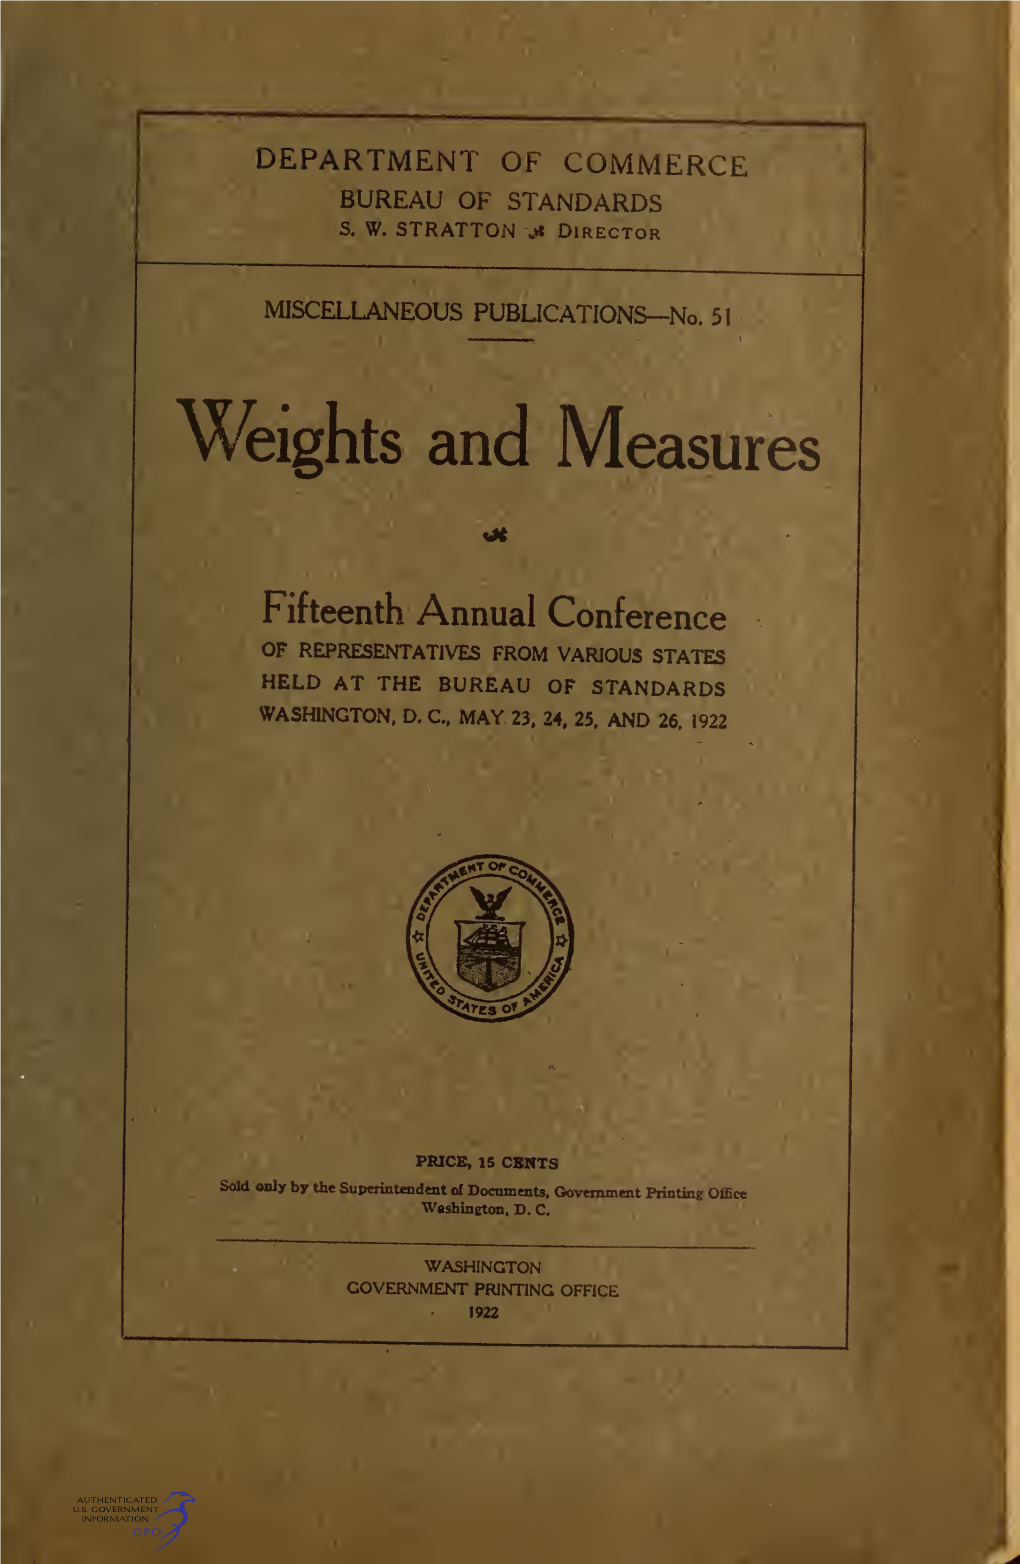 Weights and Measures Fifteenth Annual Conference